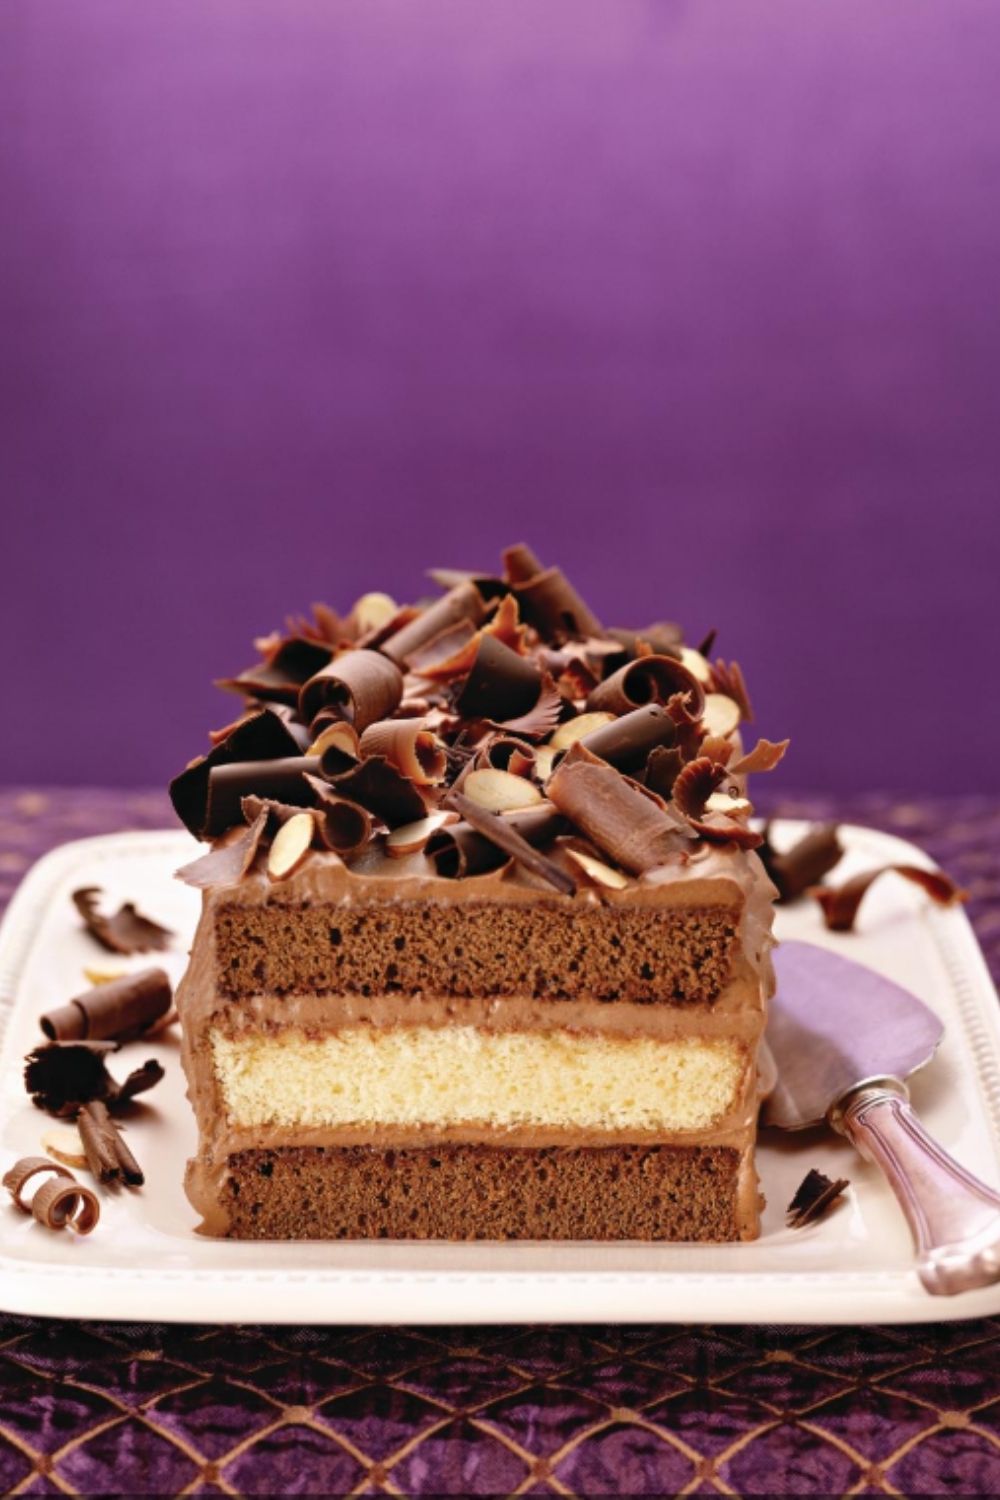 Easy Mousse Cake Filling - Any Flavor! Recipe - Food.com